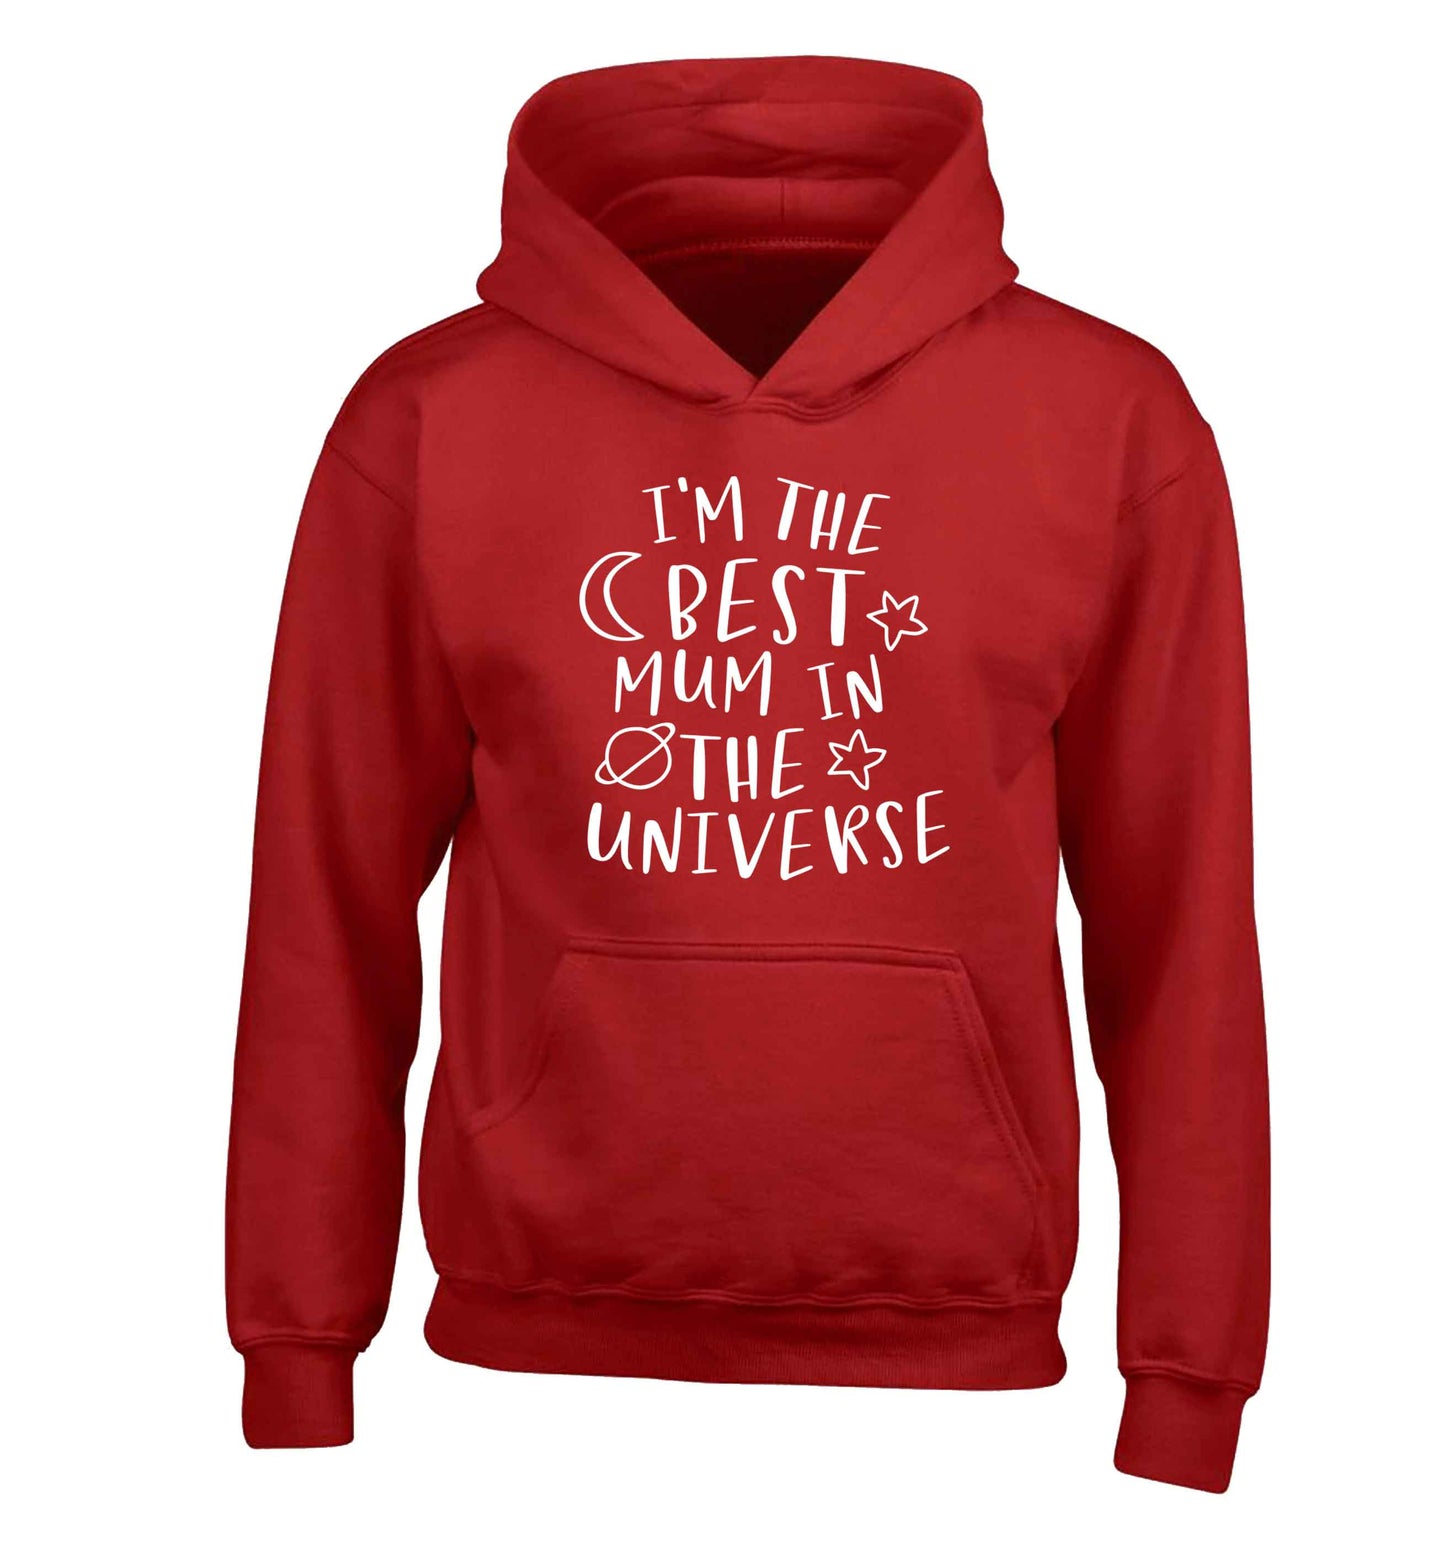 I'm the best mum in the universe children's red hoodie 12-13 Years